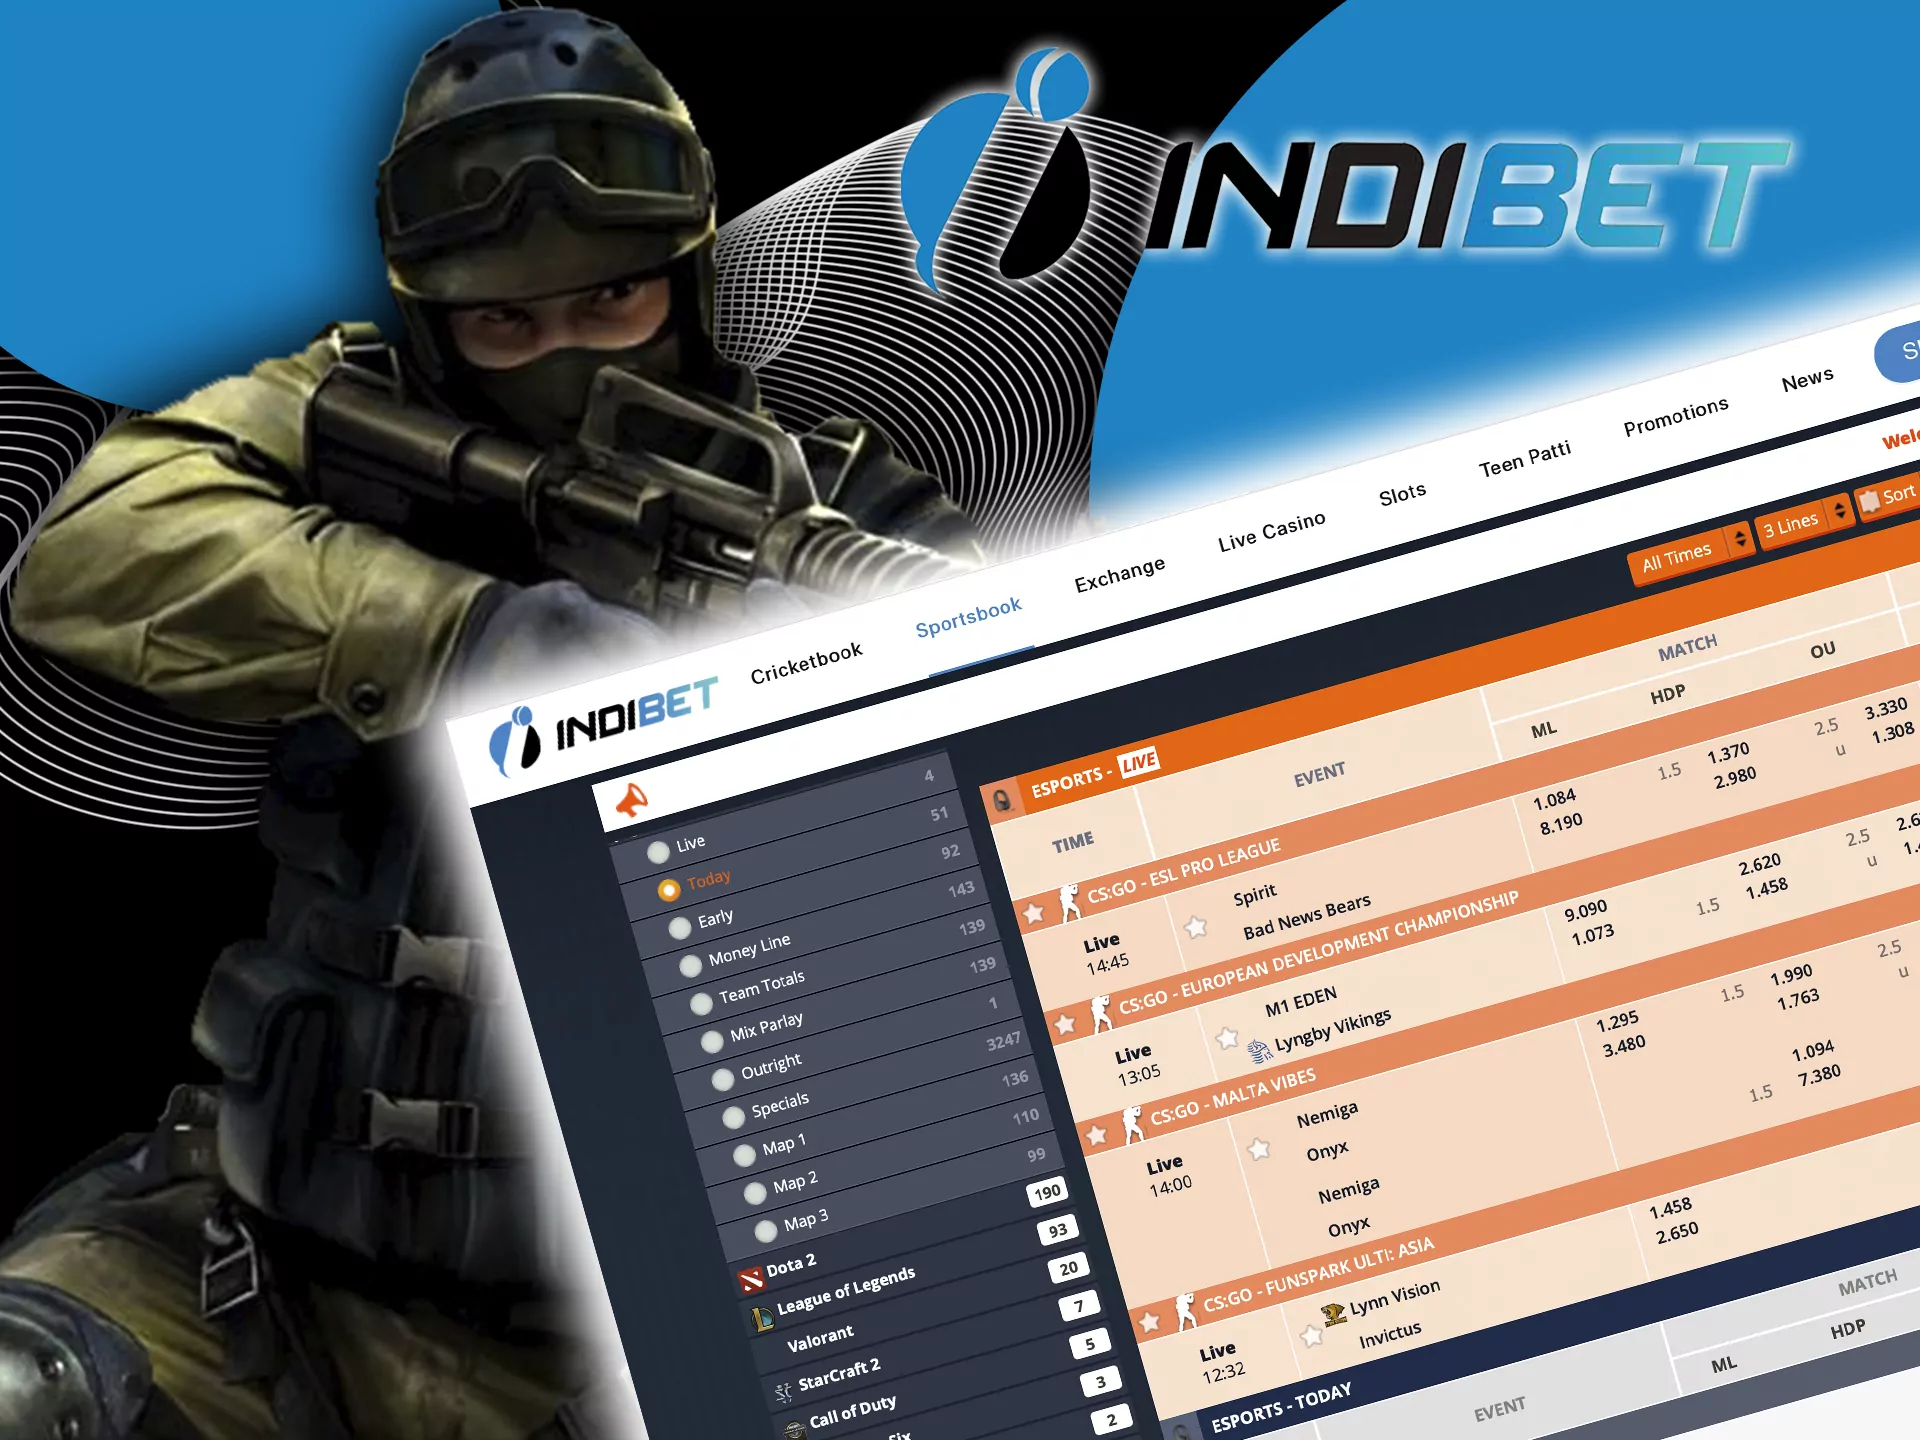 Watch your favorite CS:GO competitions and bet on them.